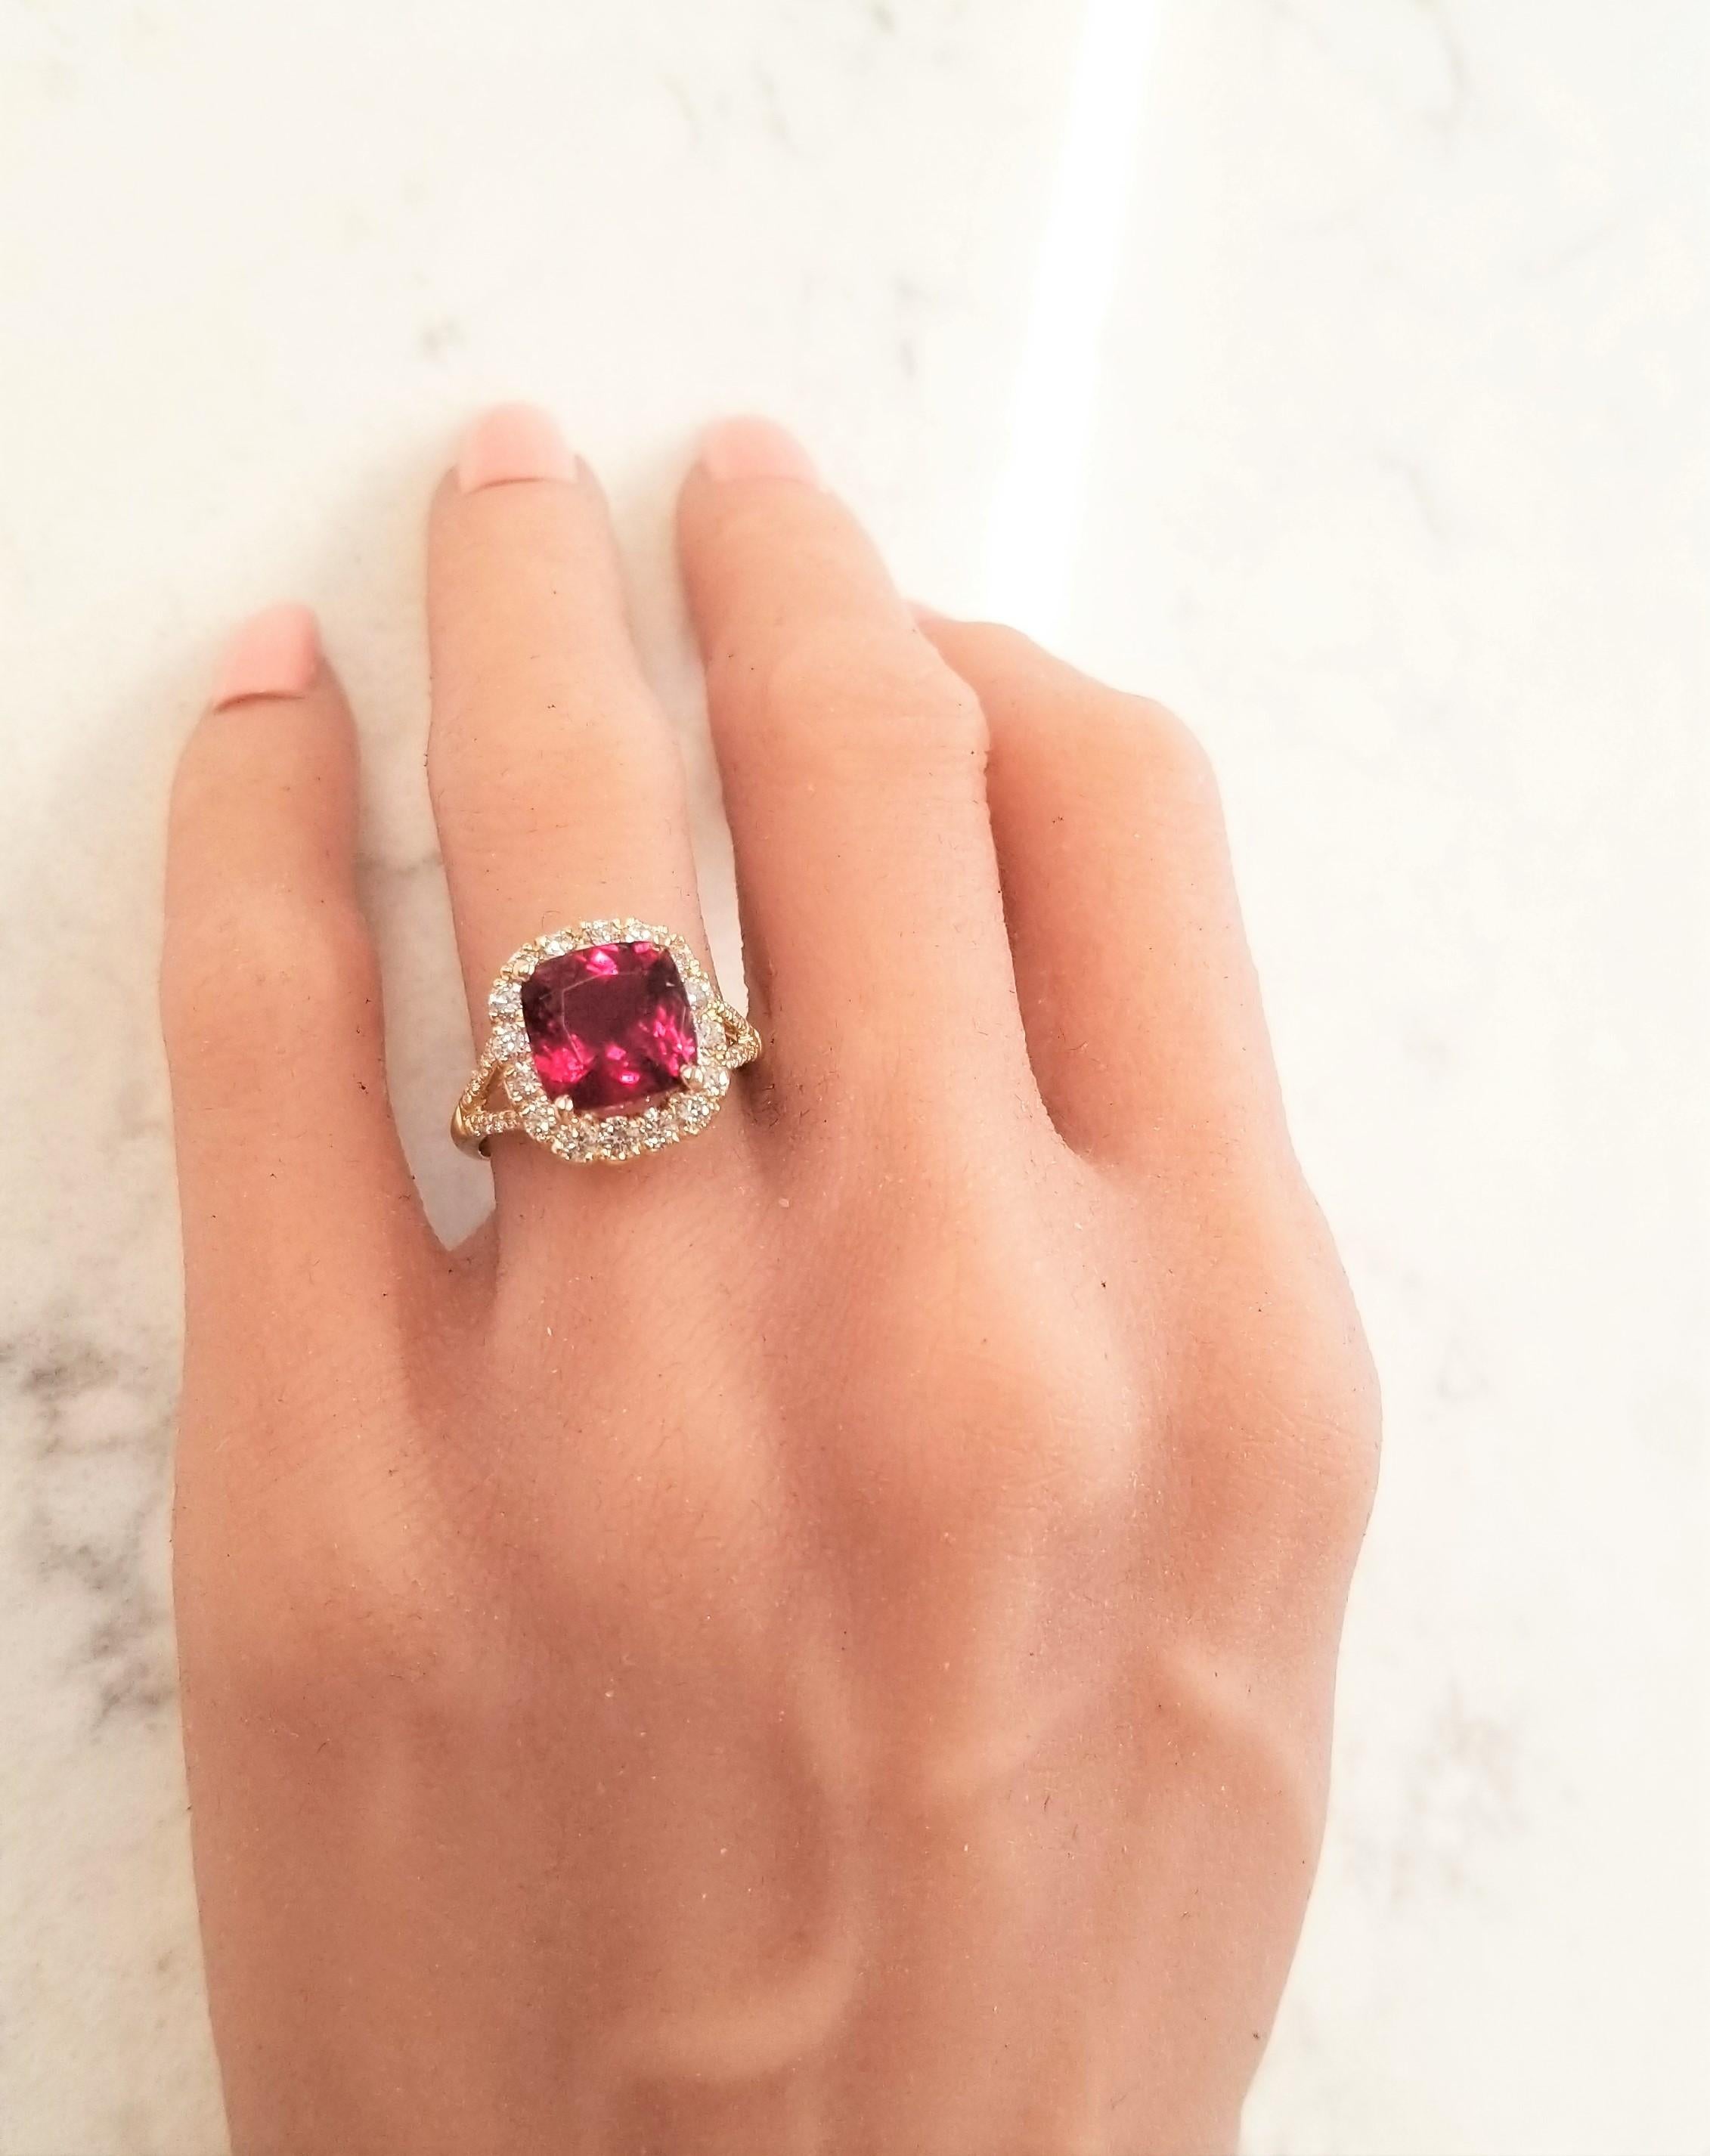 This cocktail ring features a 3.78 carat cushion cut rubellite tourmaline measuring 9.40-9.30mm. The gem source is Brazil; its color is intense, vibrant raspberry; its transparency, clarity, and luster are superb. It is accentuated by 36 round